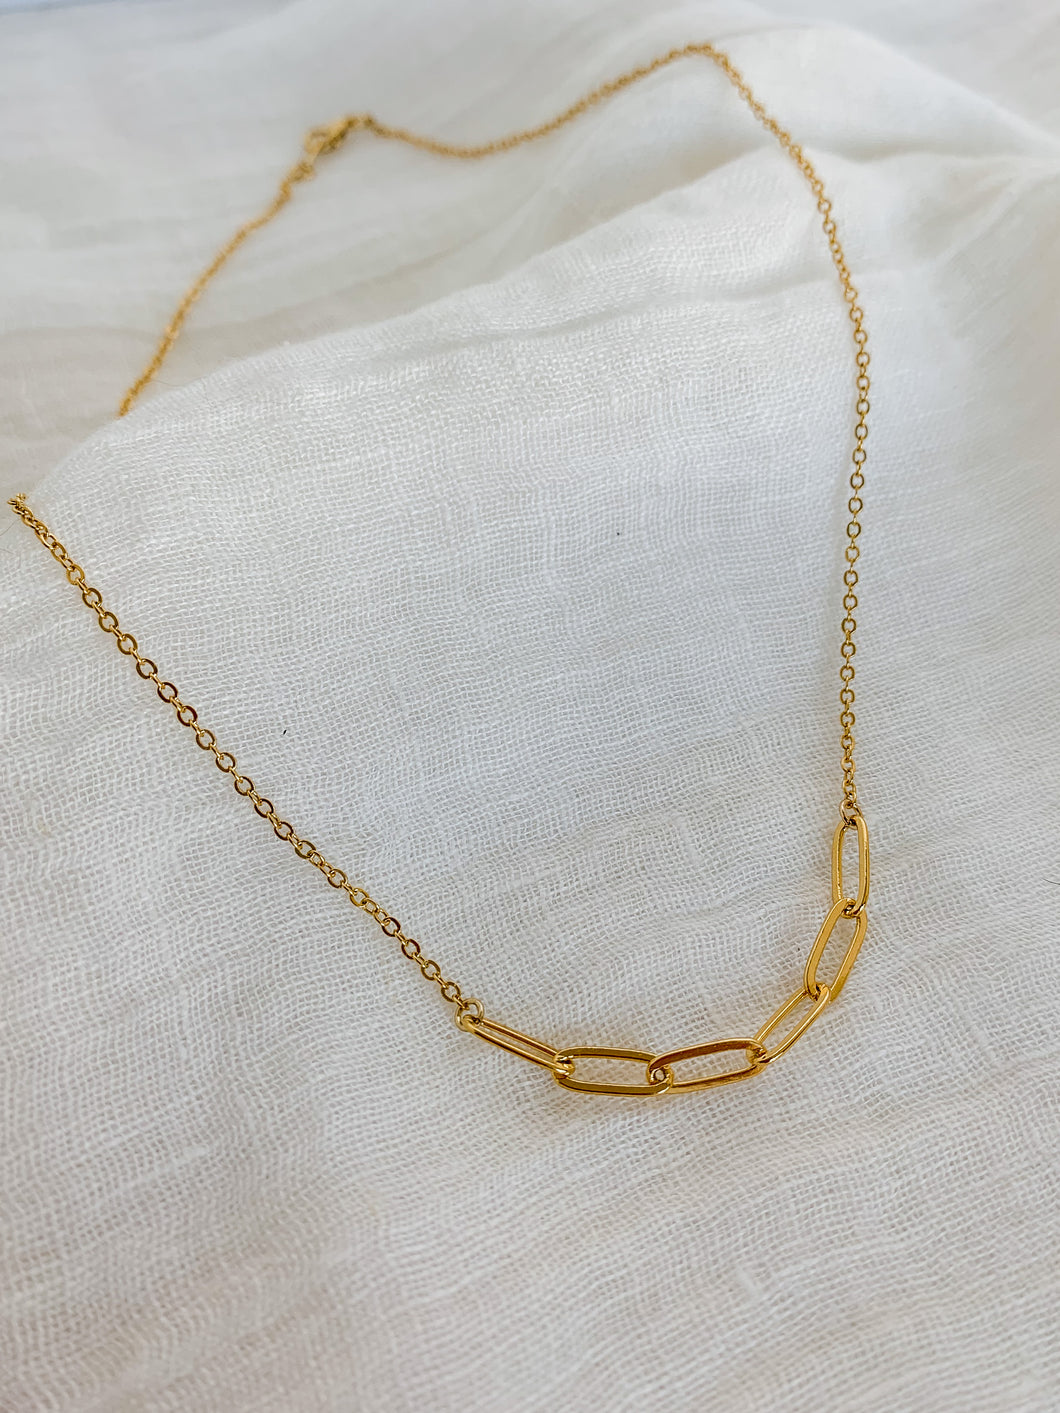 paperclip necklace link minimal dainty jewelry 